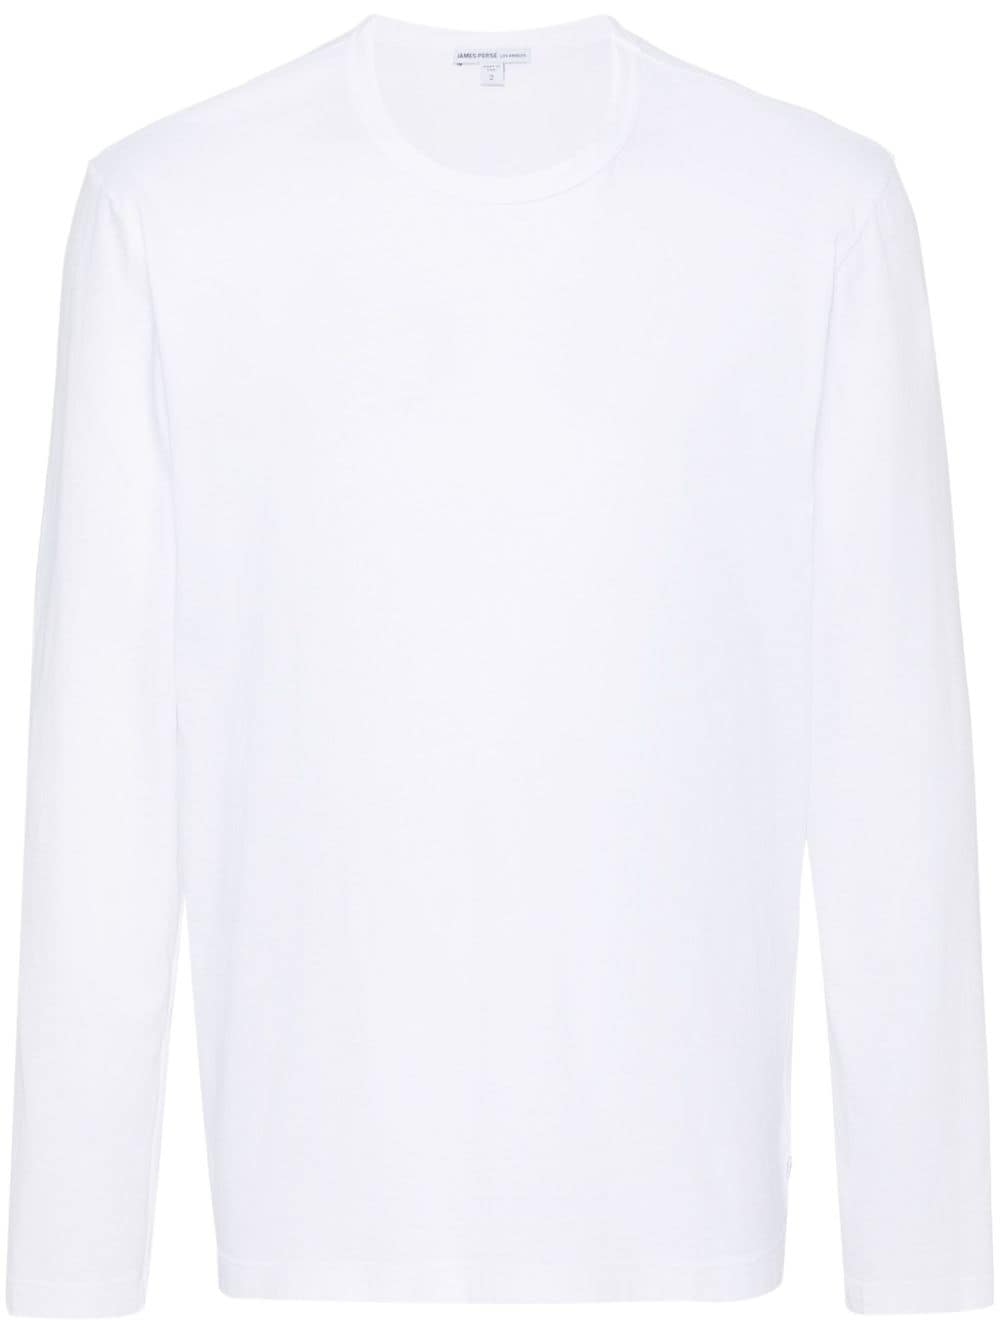 James Perse long-sleeve T-shirt - White von James Perse